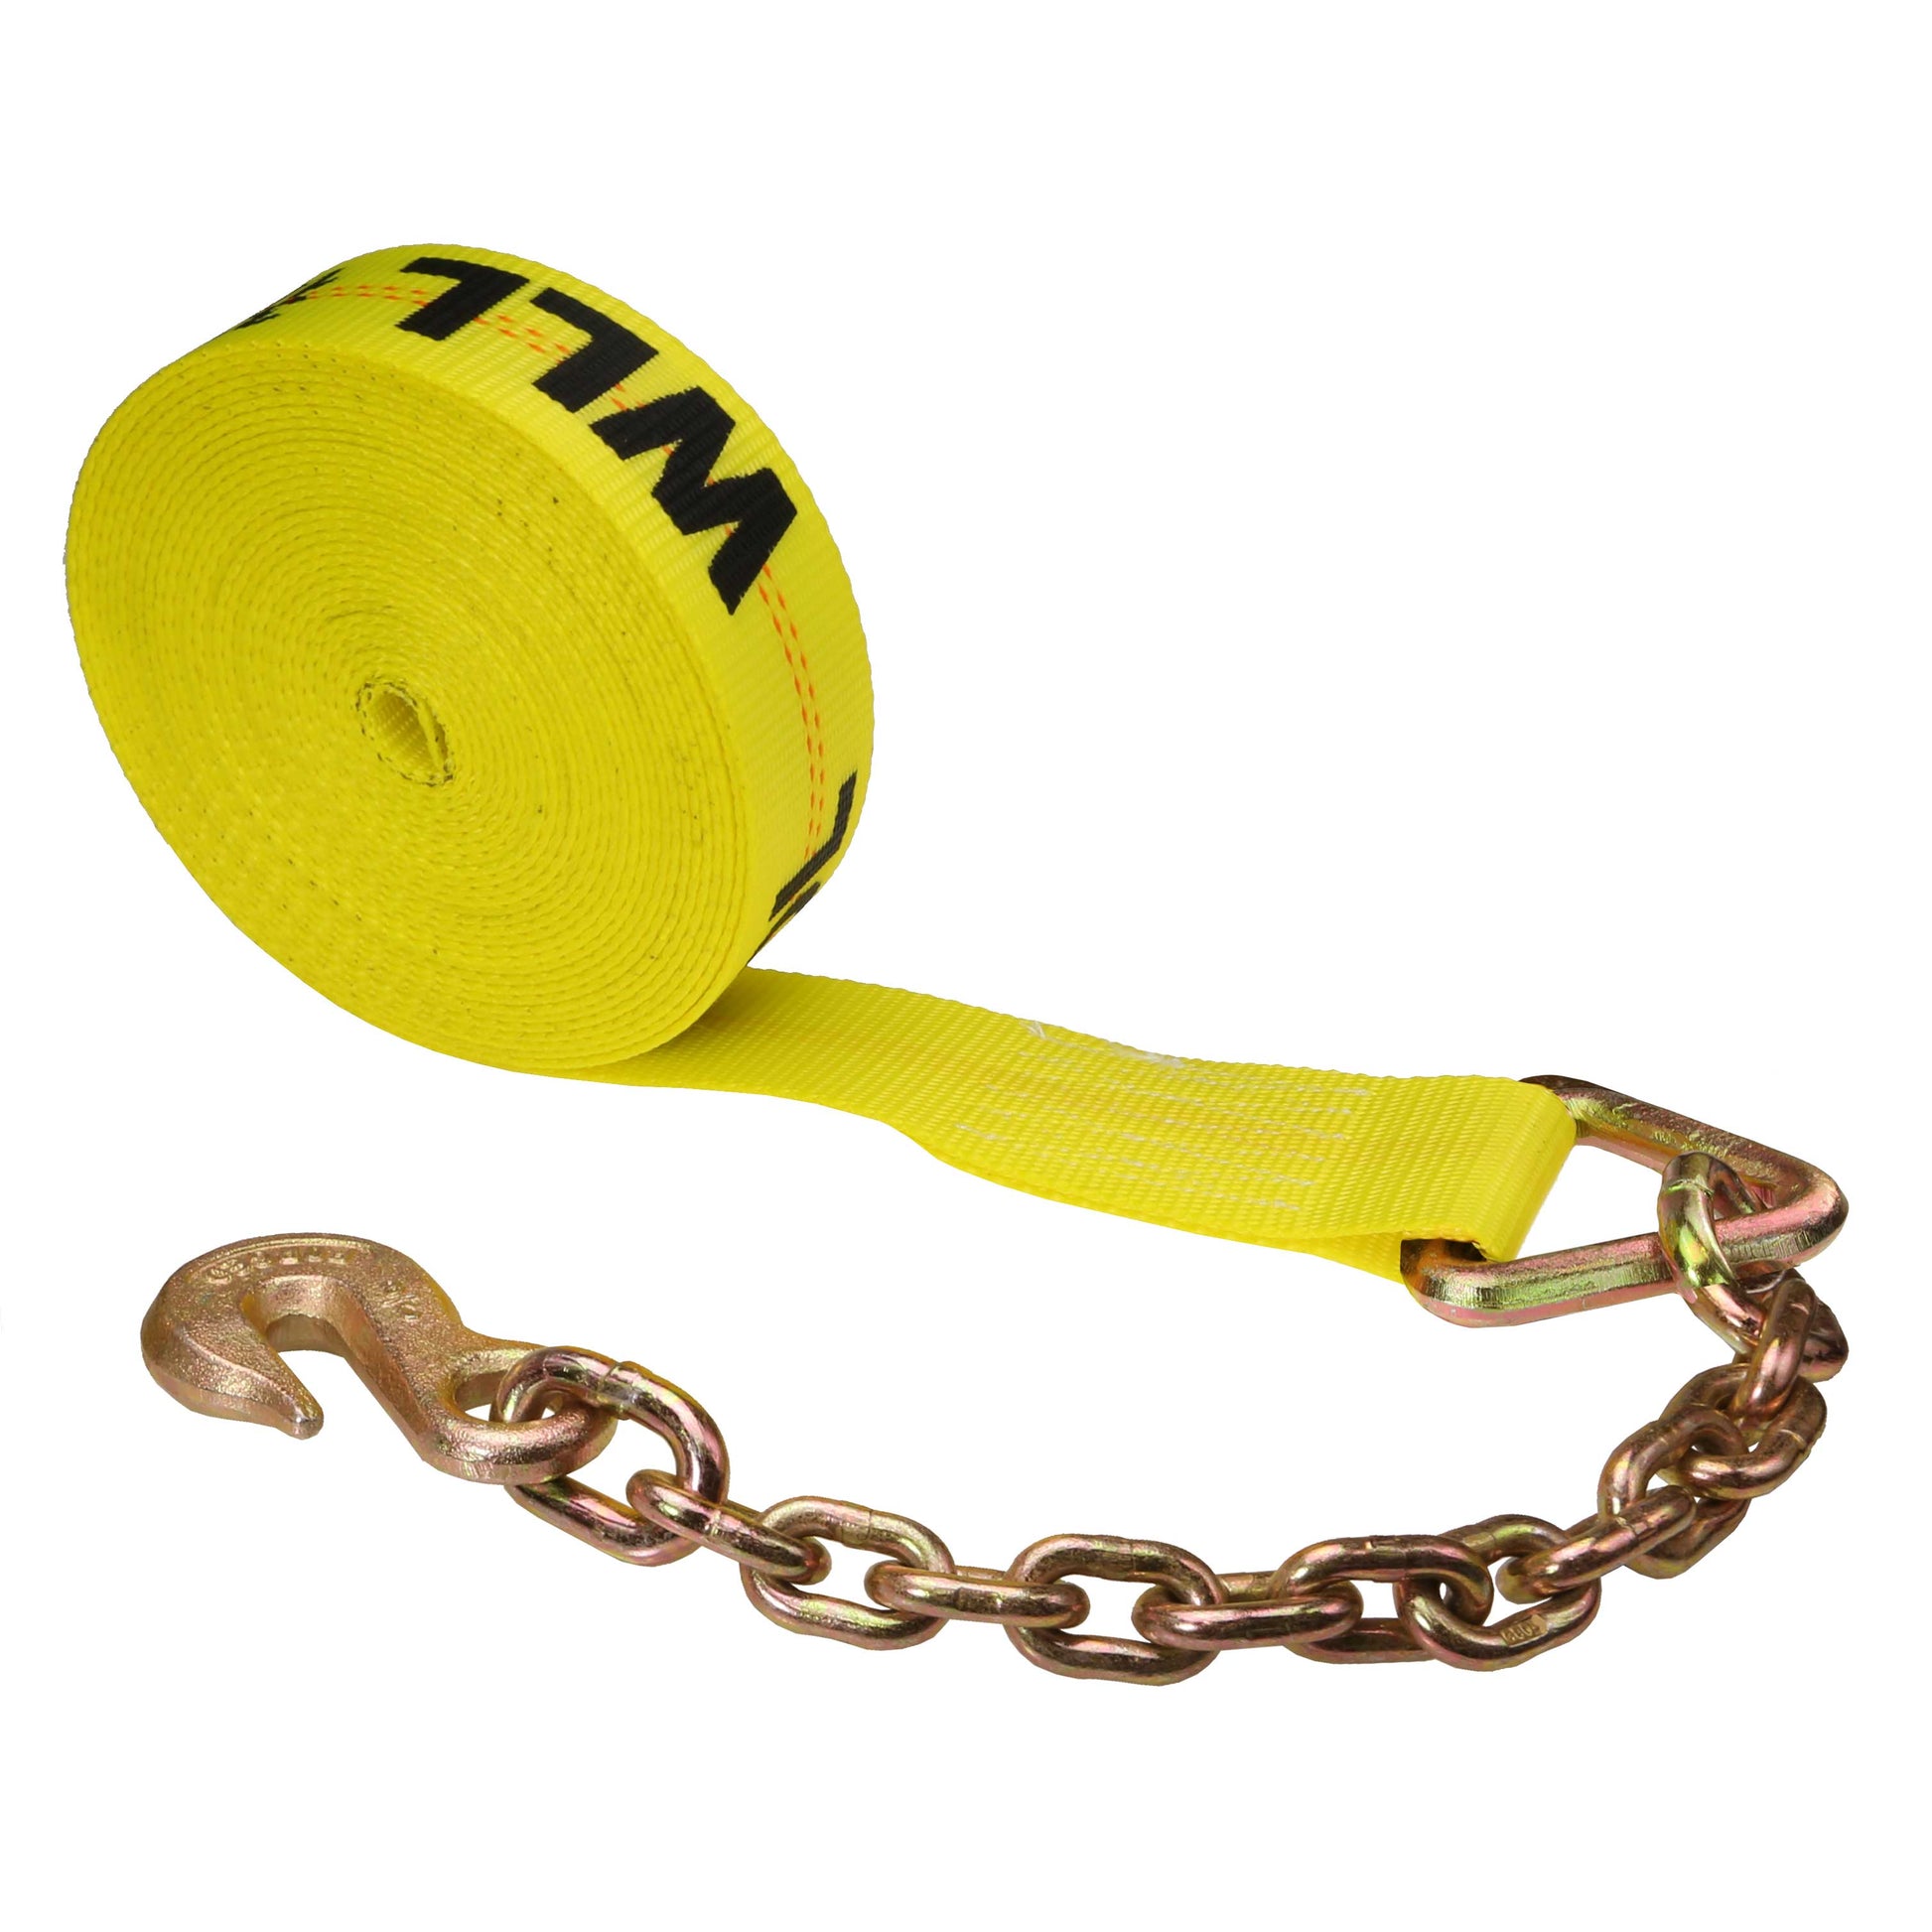 2 inch x 20 foot Winch Strap with Chain Extension